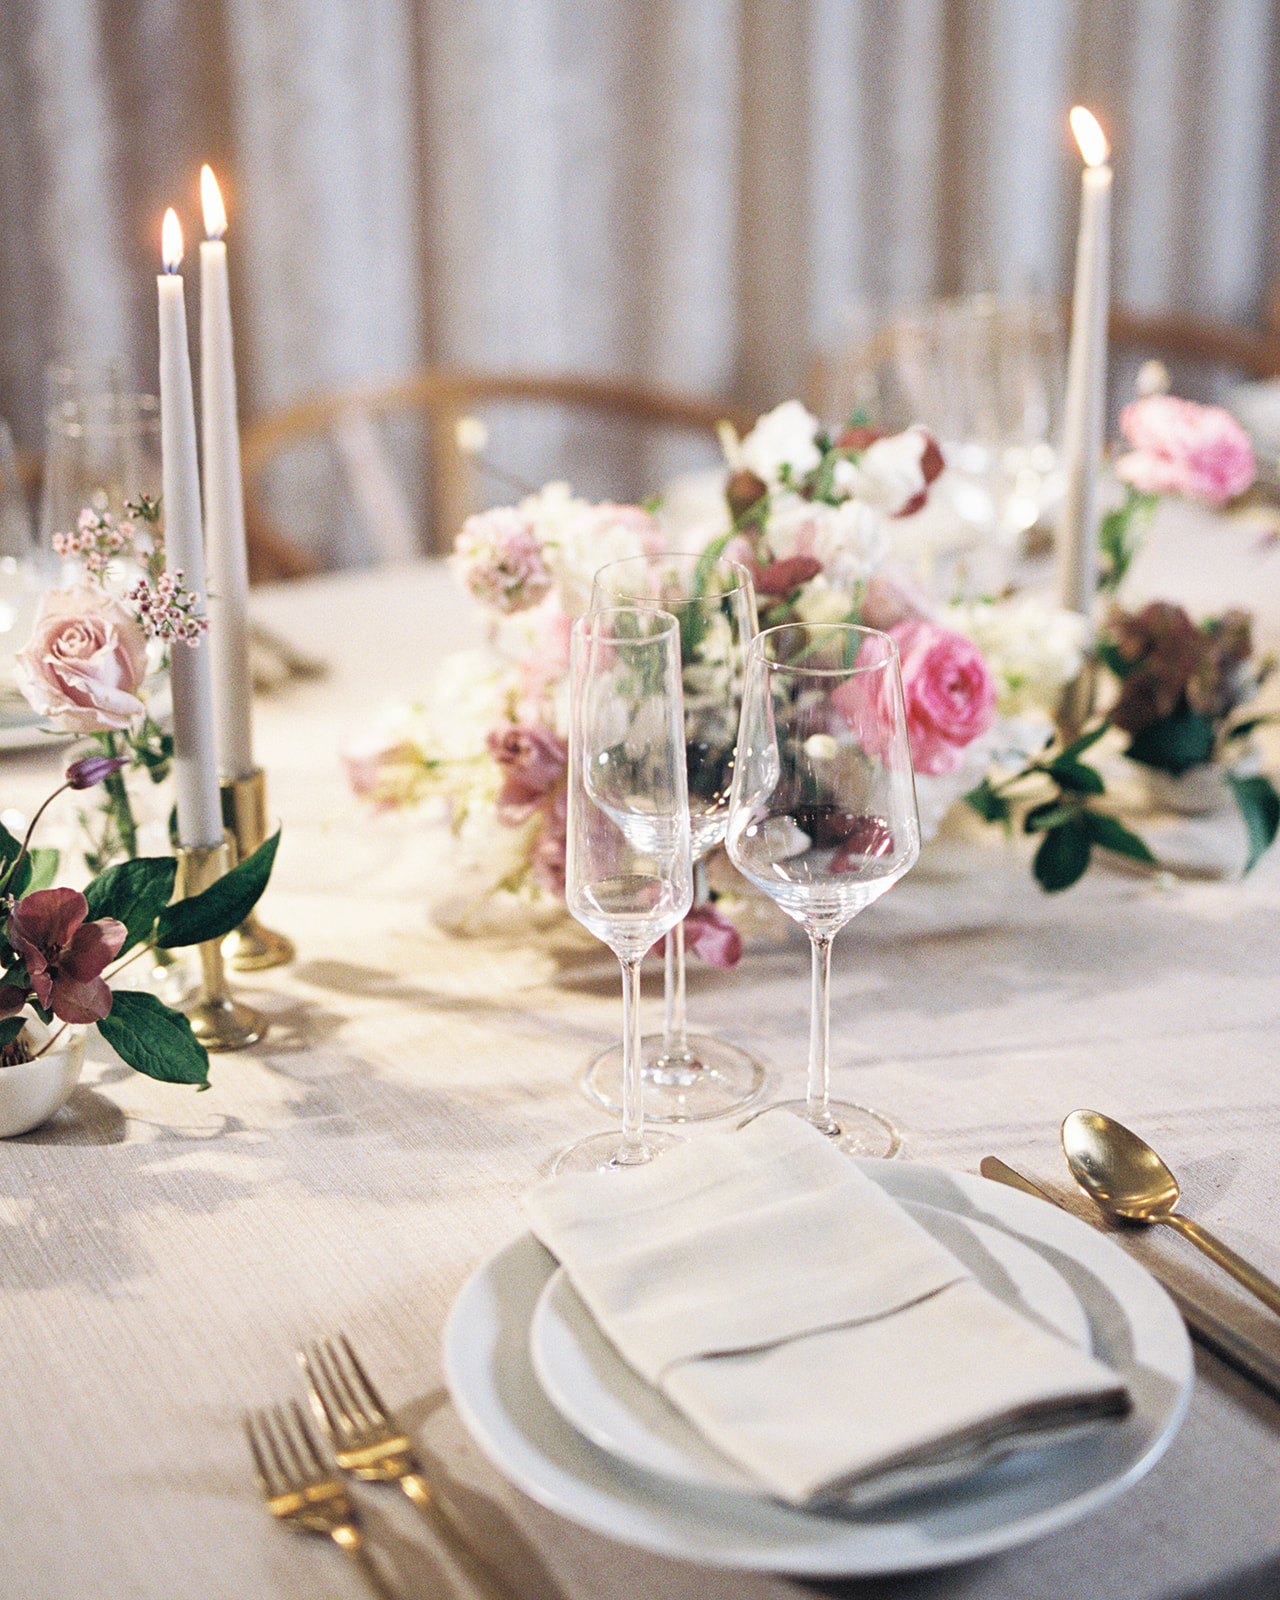 A beautiful place setting at a table designed by the Flower Bar Co. in Amelia Island, Florida.